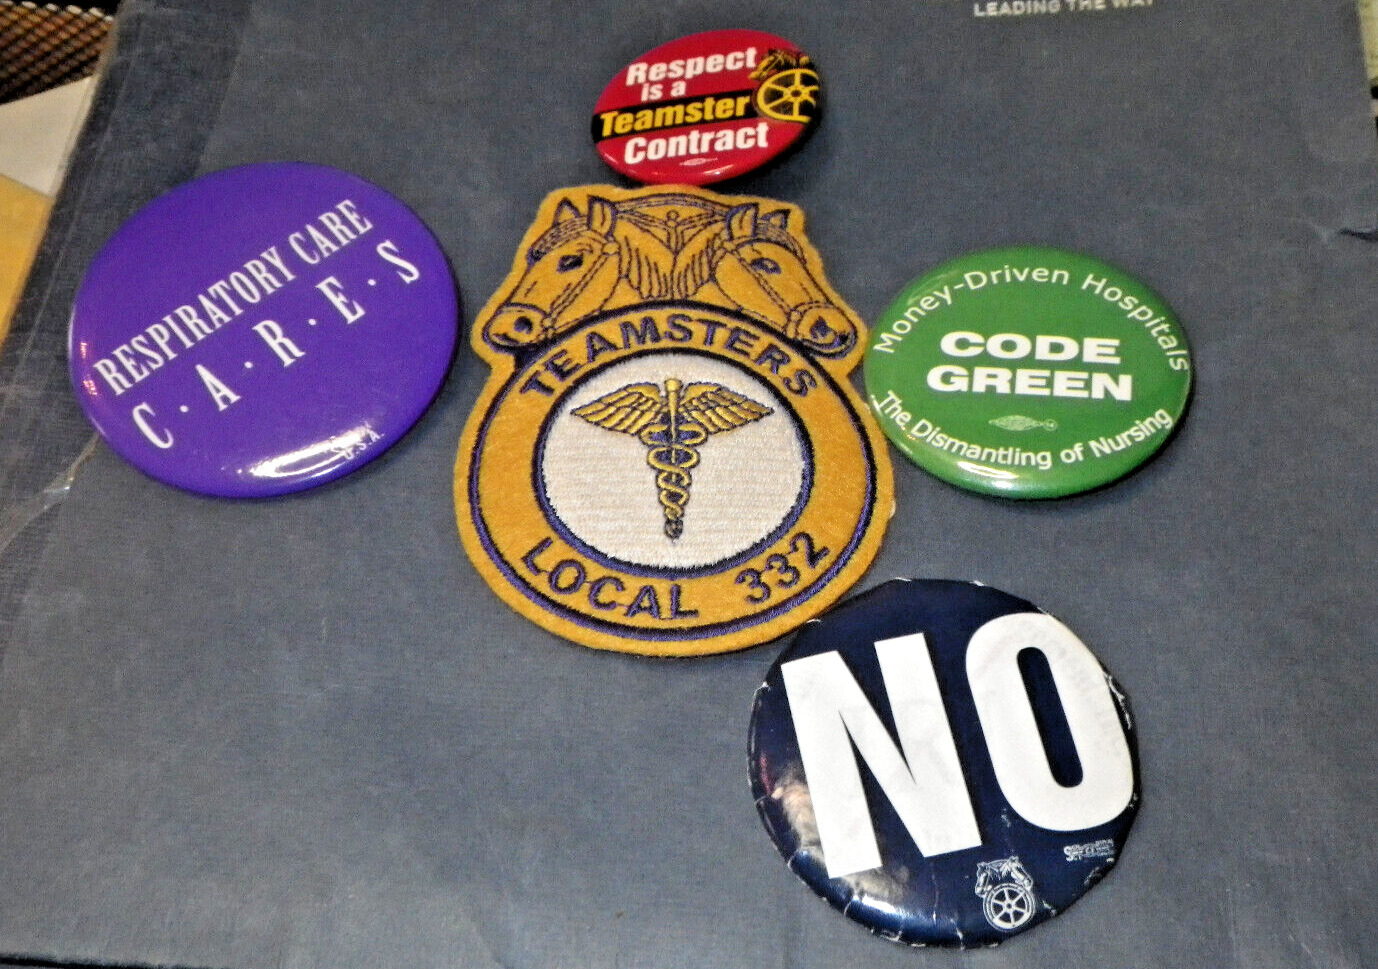 Lot Includes Vintage Teamsters Local 332 Sew on Jacket Patch - Flint, Michigan